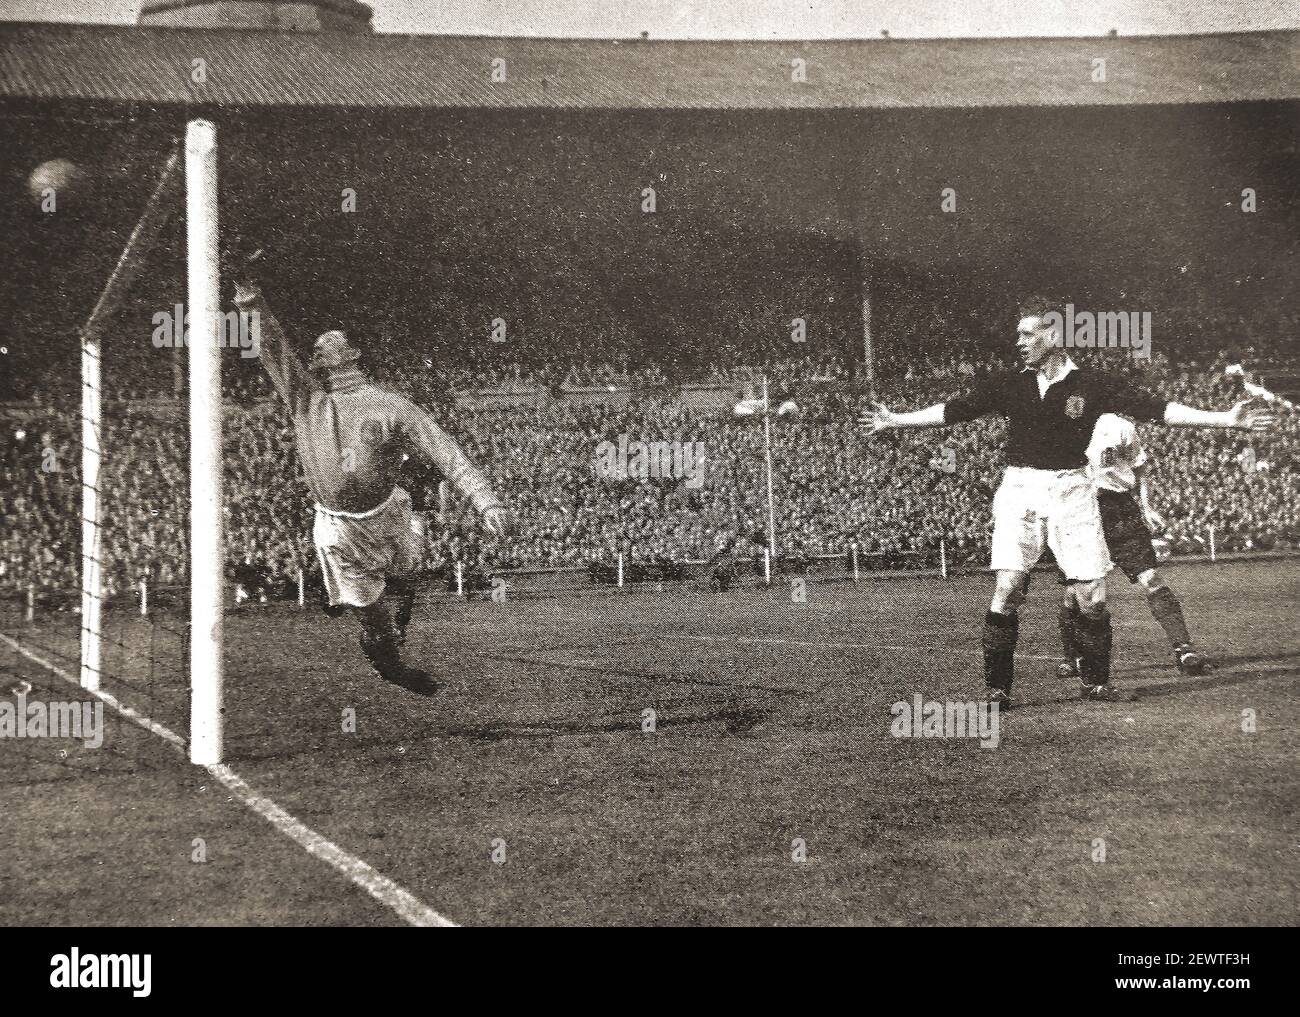 An old press photo of a goal being scored in the 1947 international football match between England and Scotland at Webley, Engand. Stock Photo